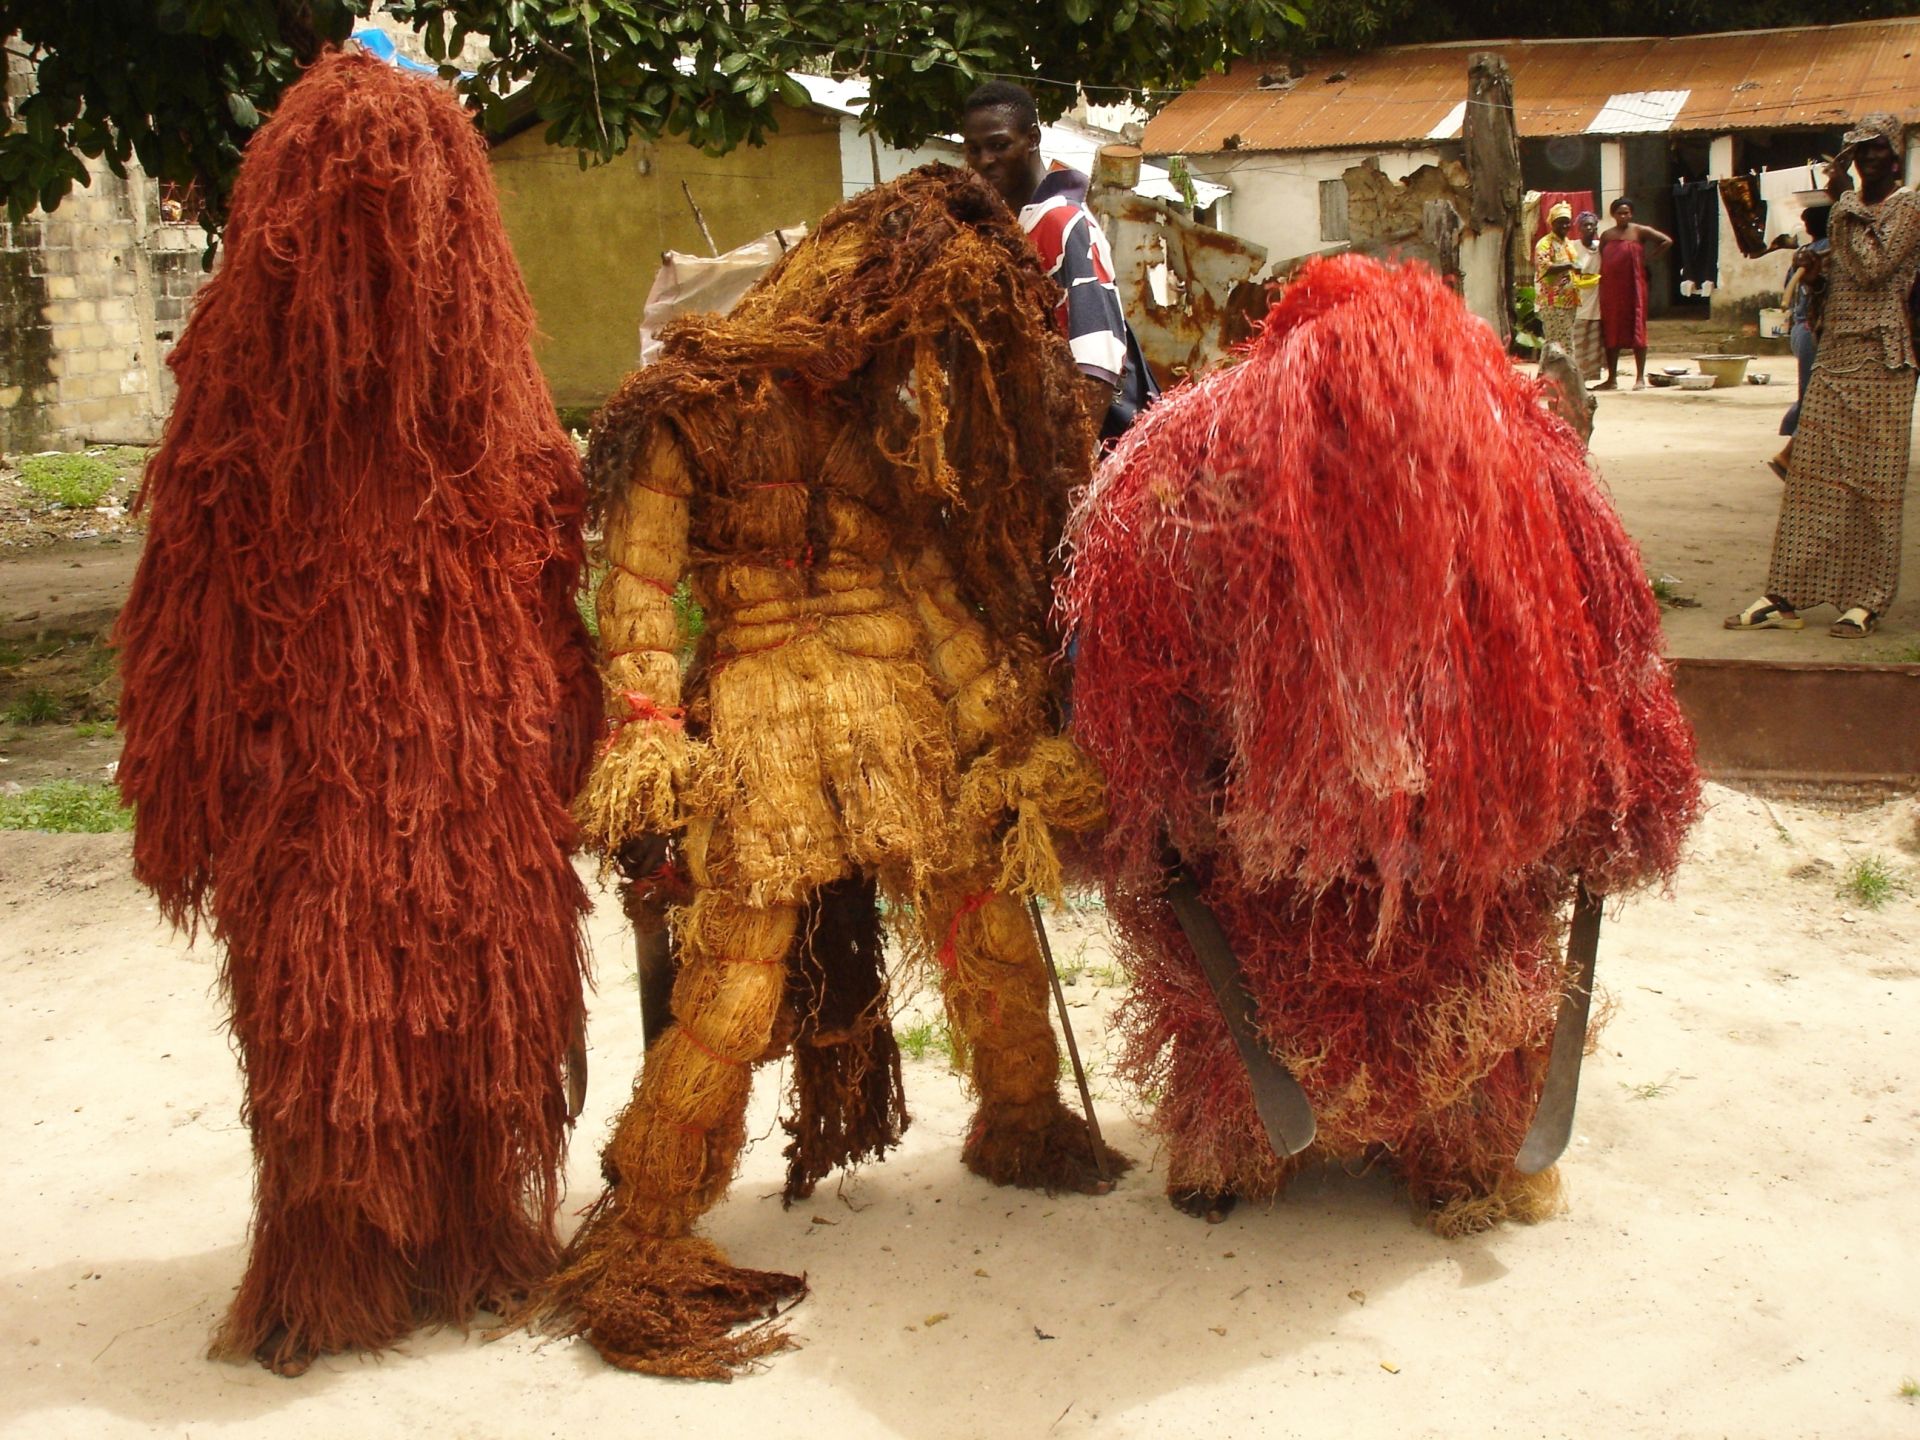 The Kankurang is a protective spirit, embodied by a masked and costumed man, at the centre of a ritual system comprising songs, traditions and initiatory rites for young boys. The ritual ensures the transmission and teaching of complex know-how and practices underpinning Manding cultural identity.